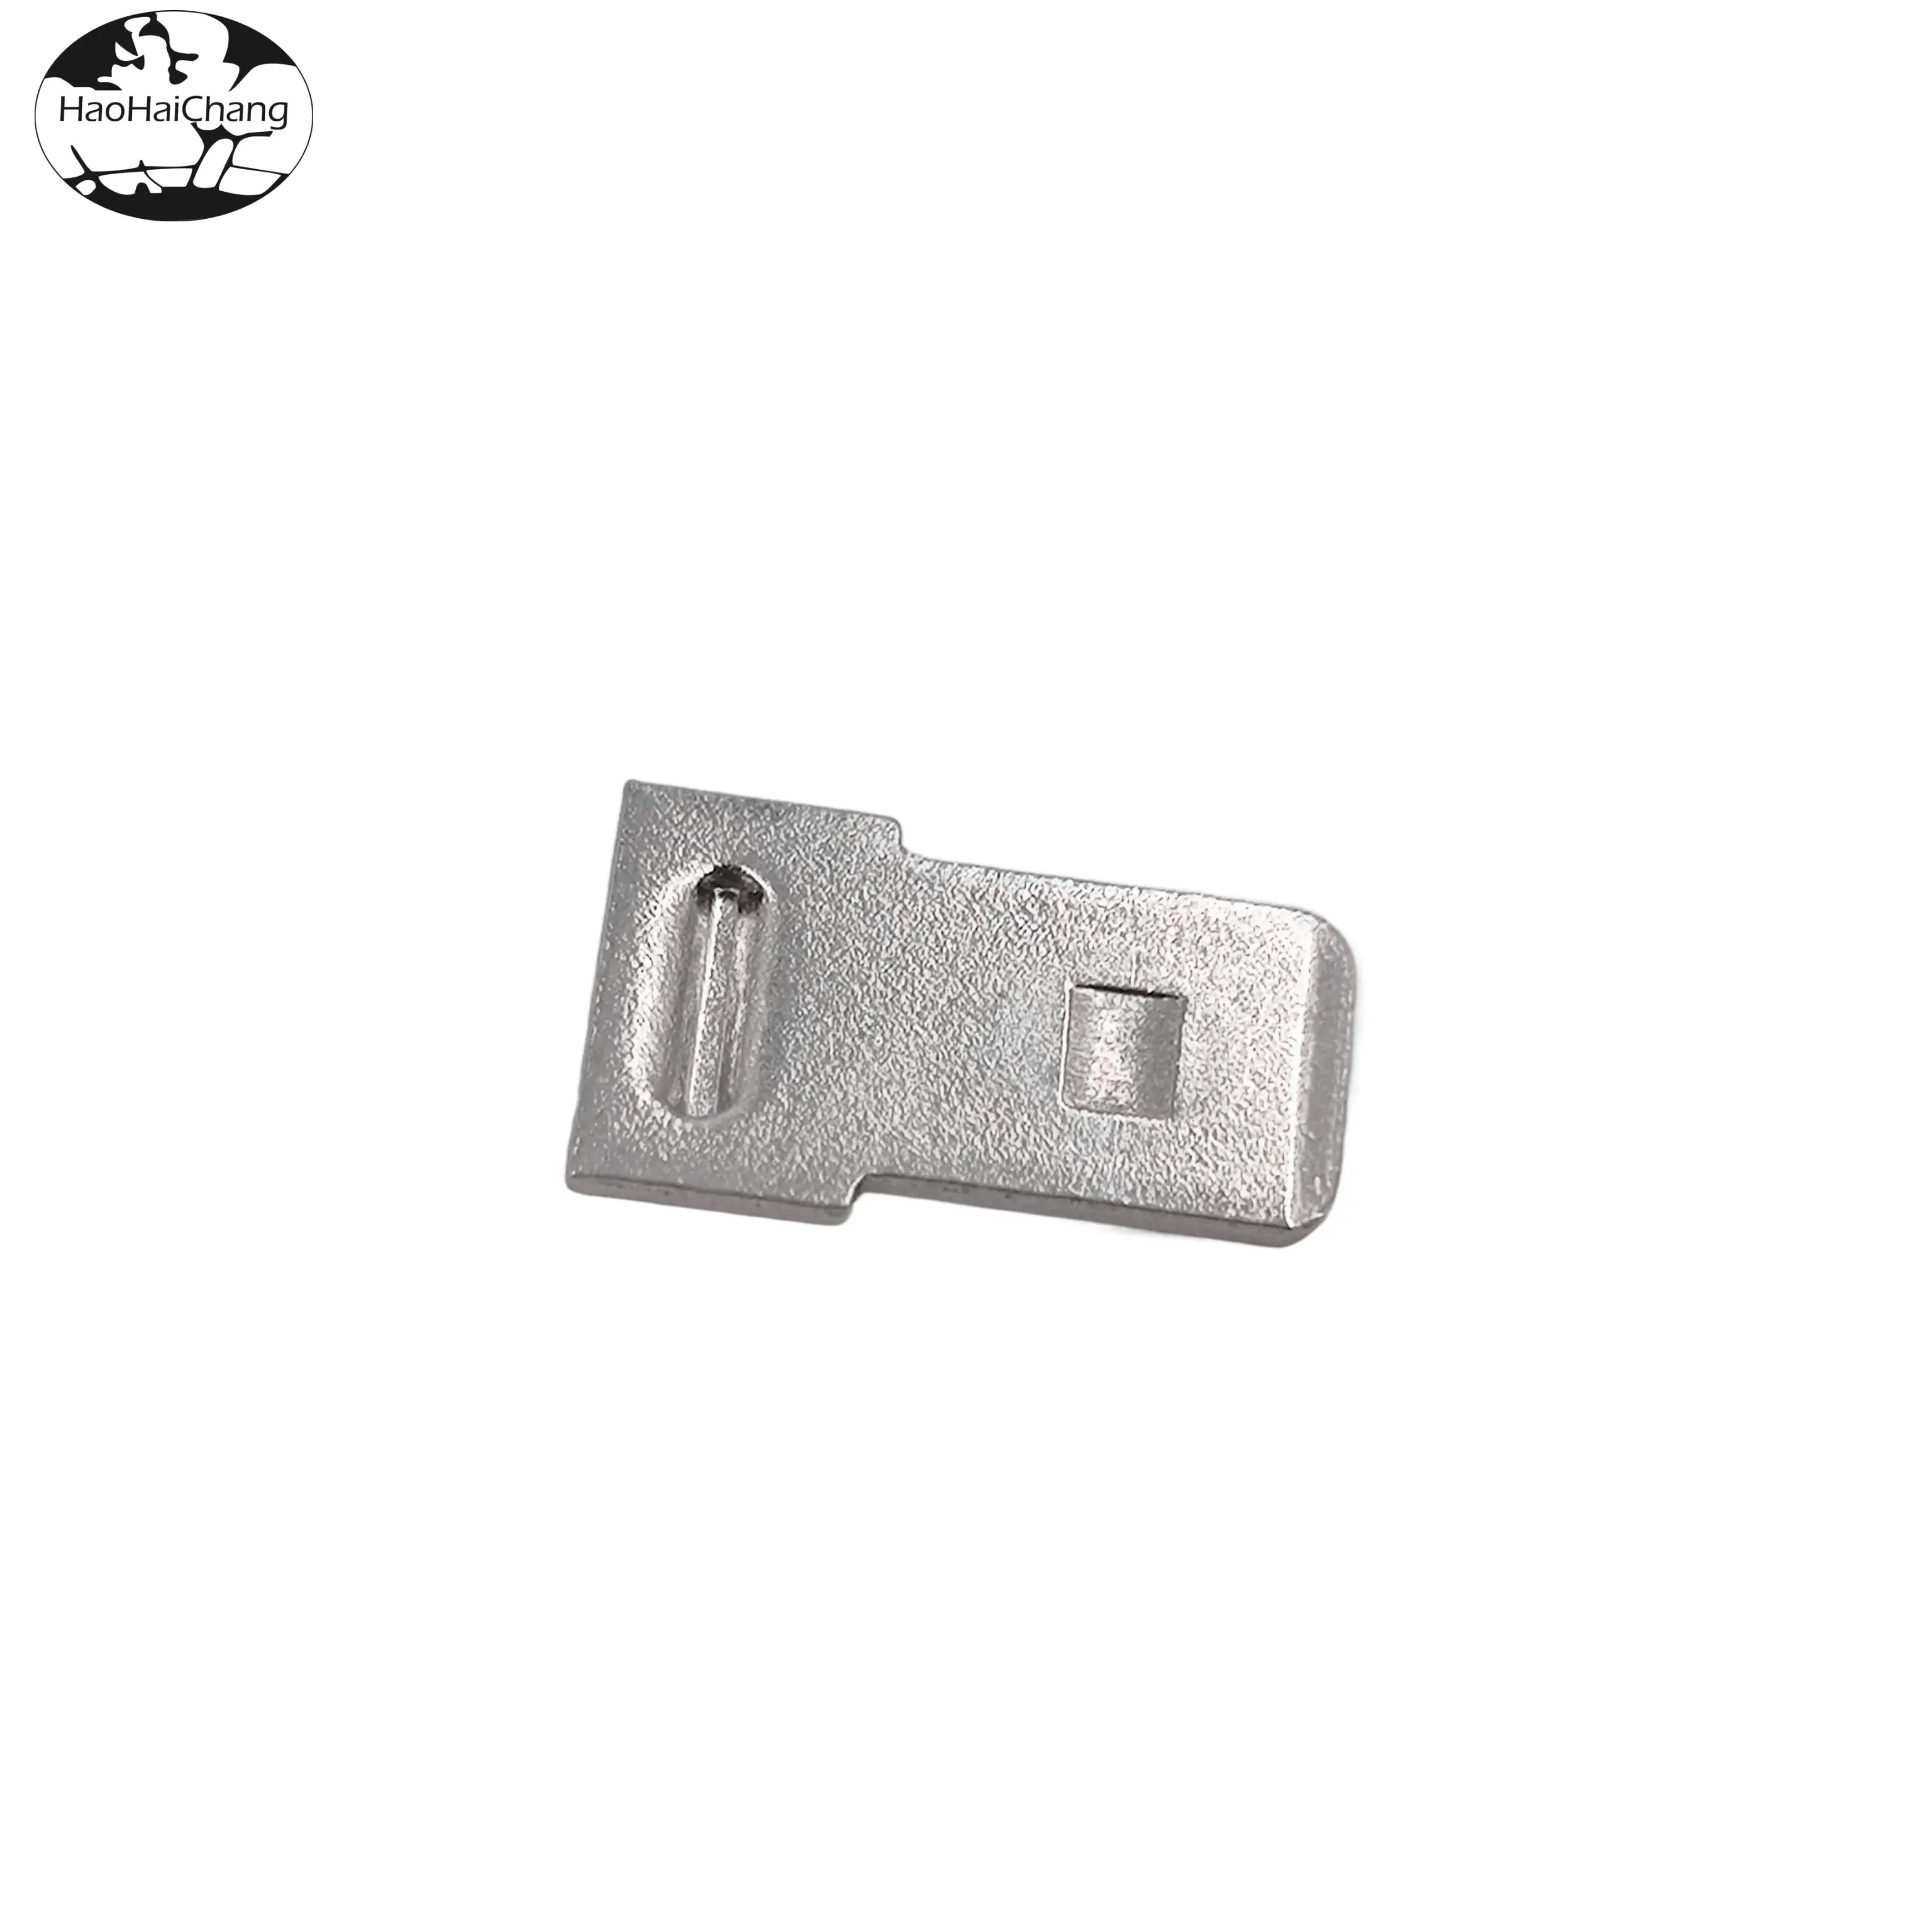 HHC-0146 Connector